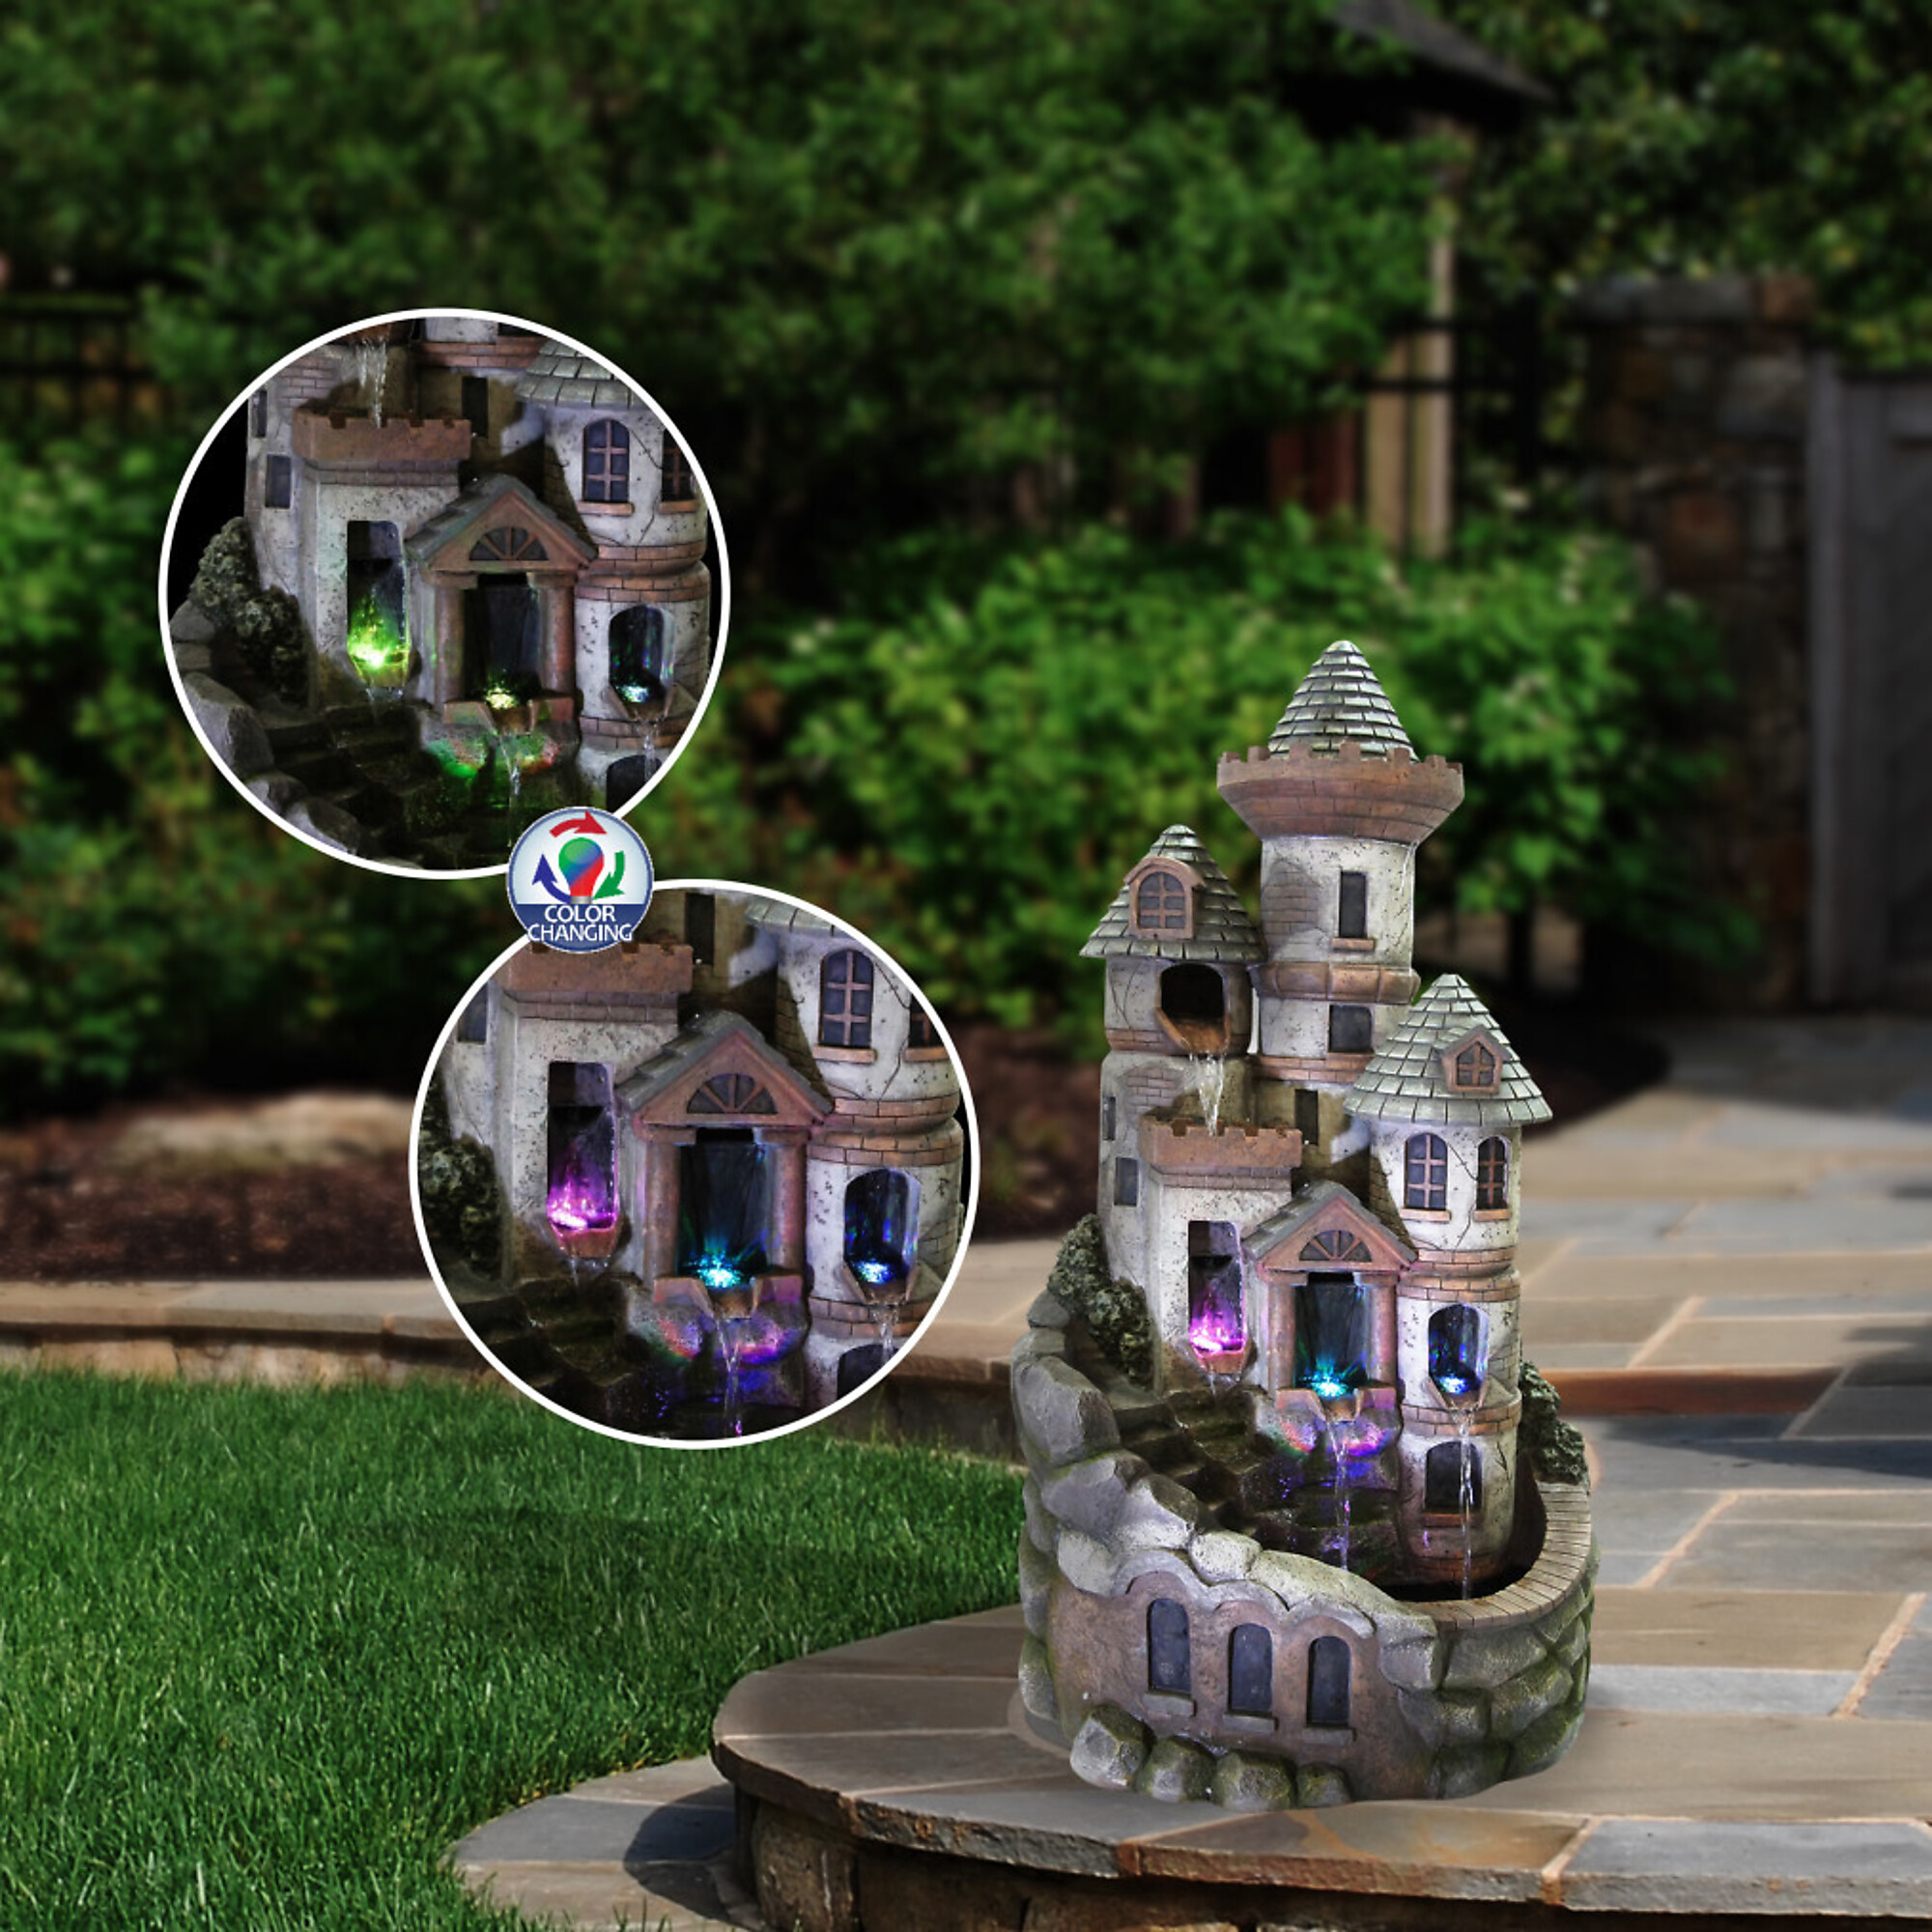 Alpine Corporation, Tower Castle Fountain w/ Color Changing LED Lights, Volts 120 Power Cord Length 6 ft, Model USA1368